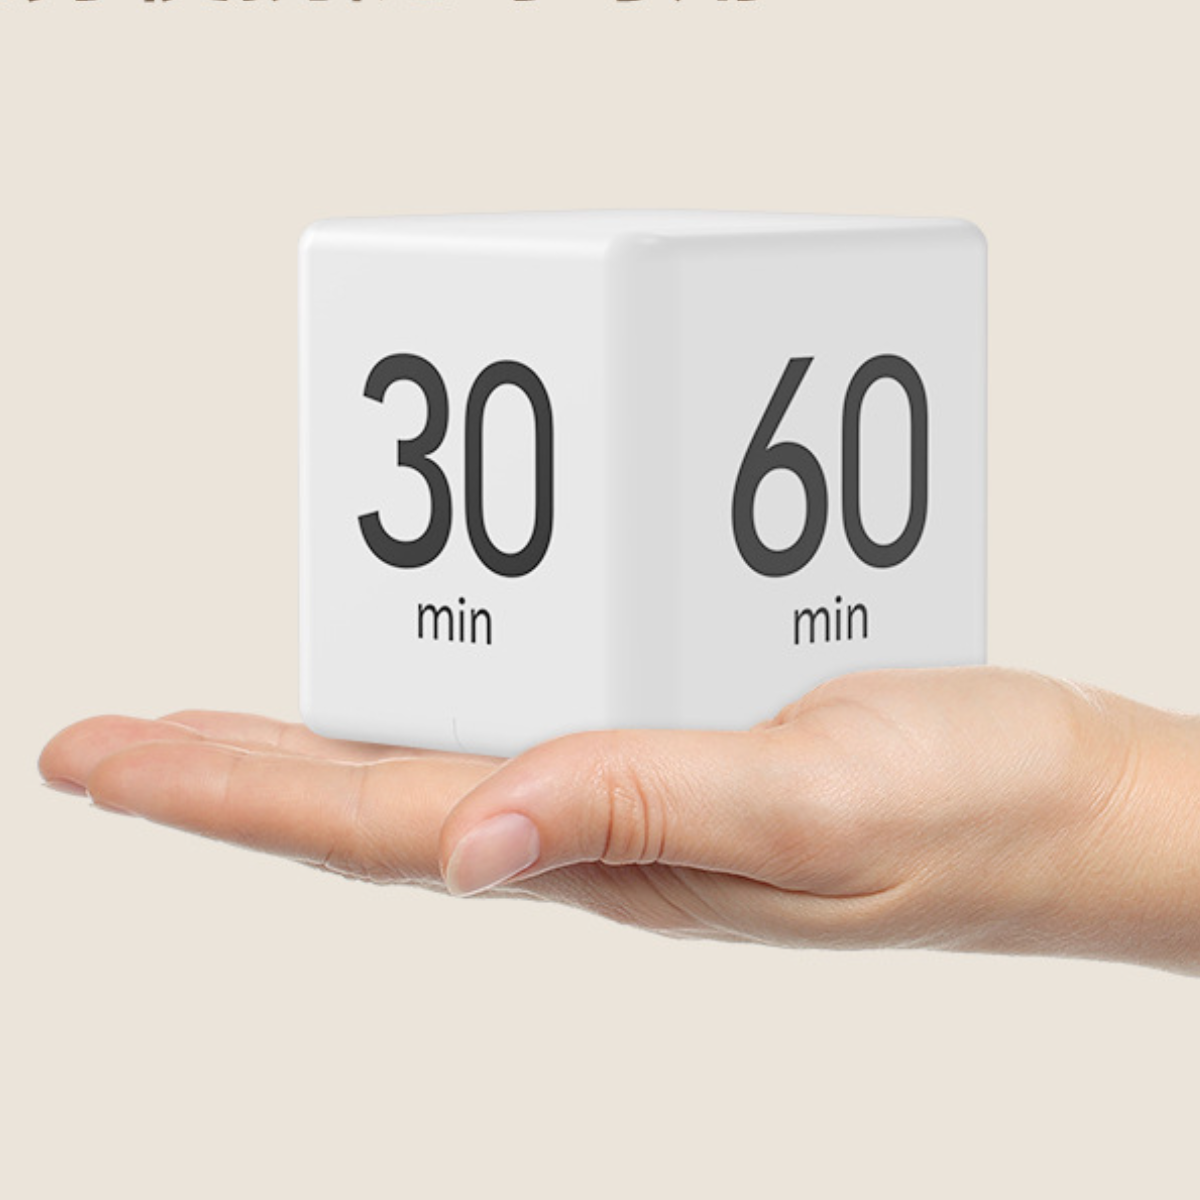 to Precise Easy Countdown Timer operate minutes Timer: 15-20-30-60 Rubik\'s UWOT White Cube timing